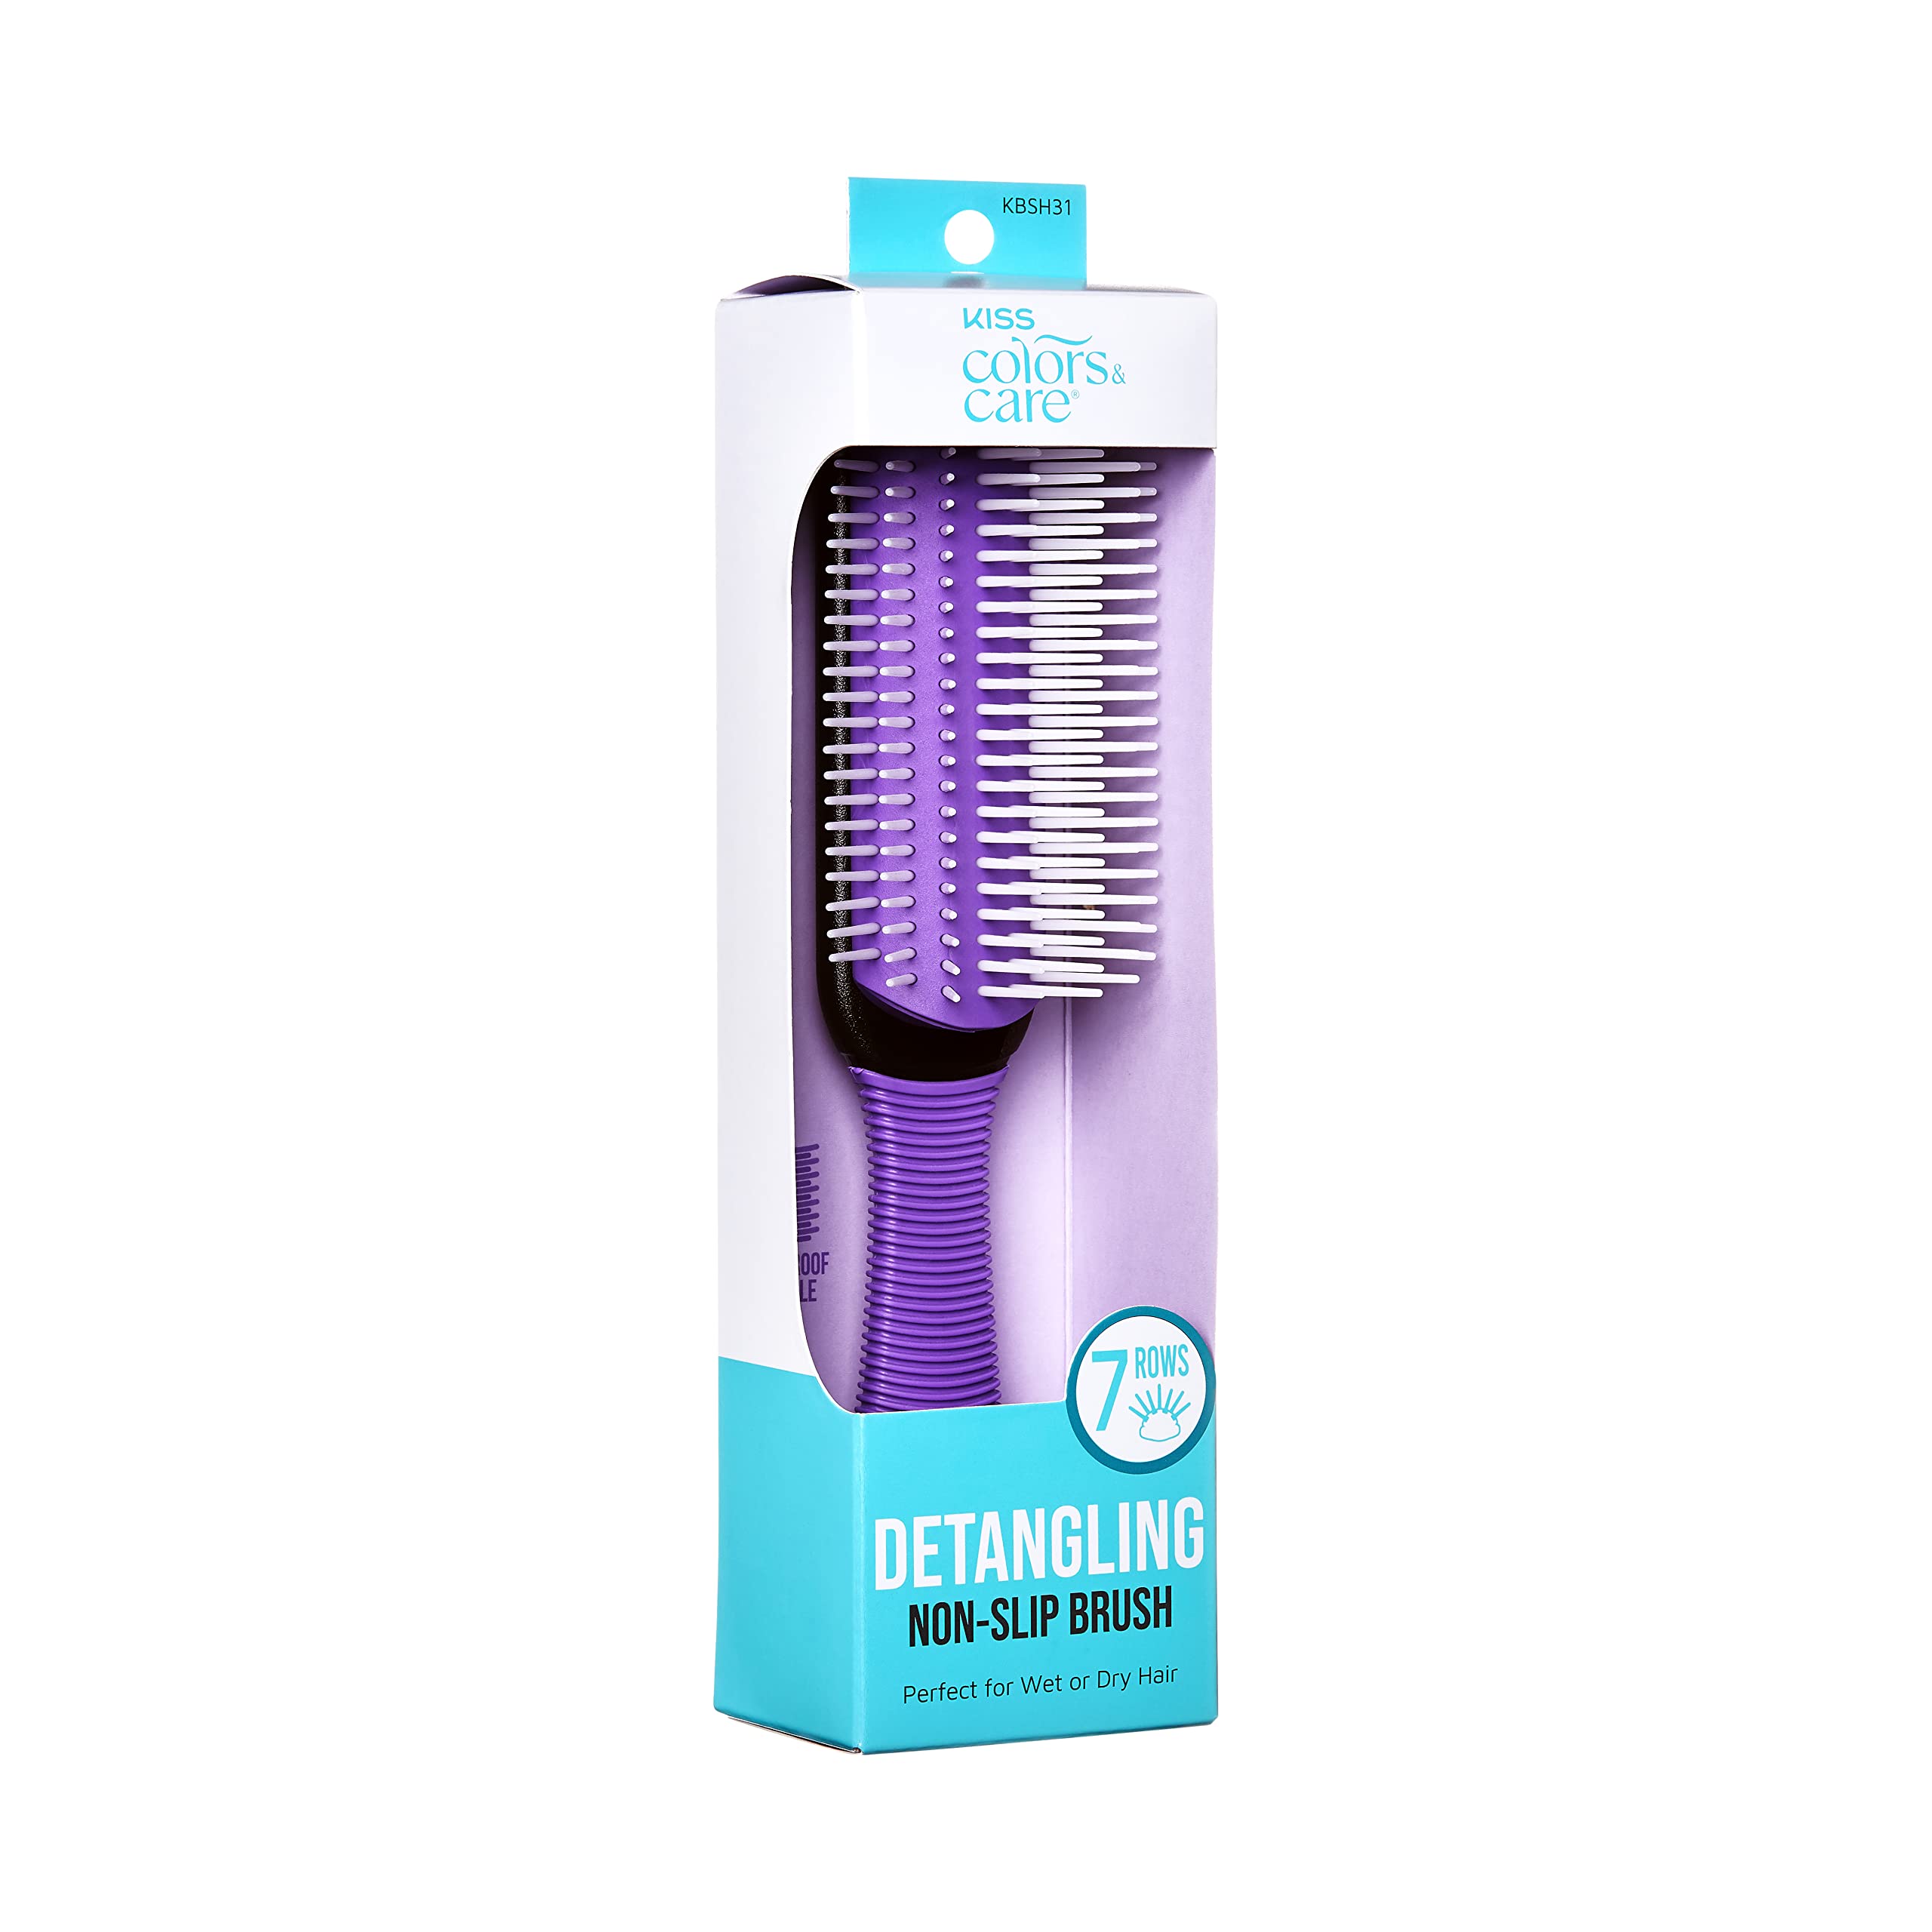 KISS Colors & Care 7 Row Non-Slip Detangling Hair Brush, Removable Cushion For Easy Cleaning, Slip-Proof Handle For Sturdy Grip , Detangles Seamlessly Without Pulling or Tugging Hair, Suitable for All Hair Types